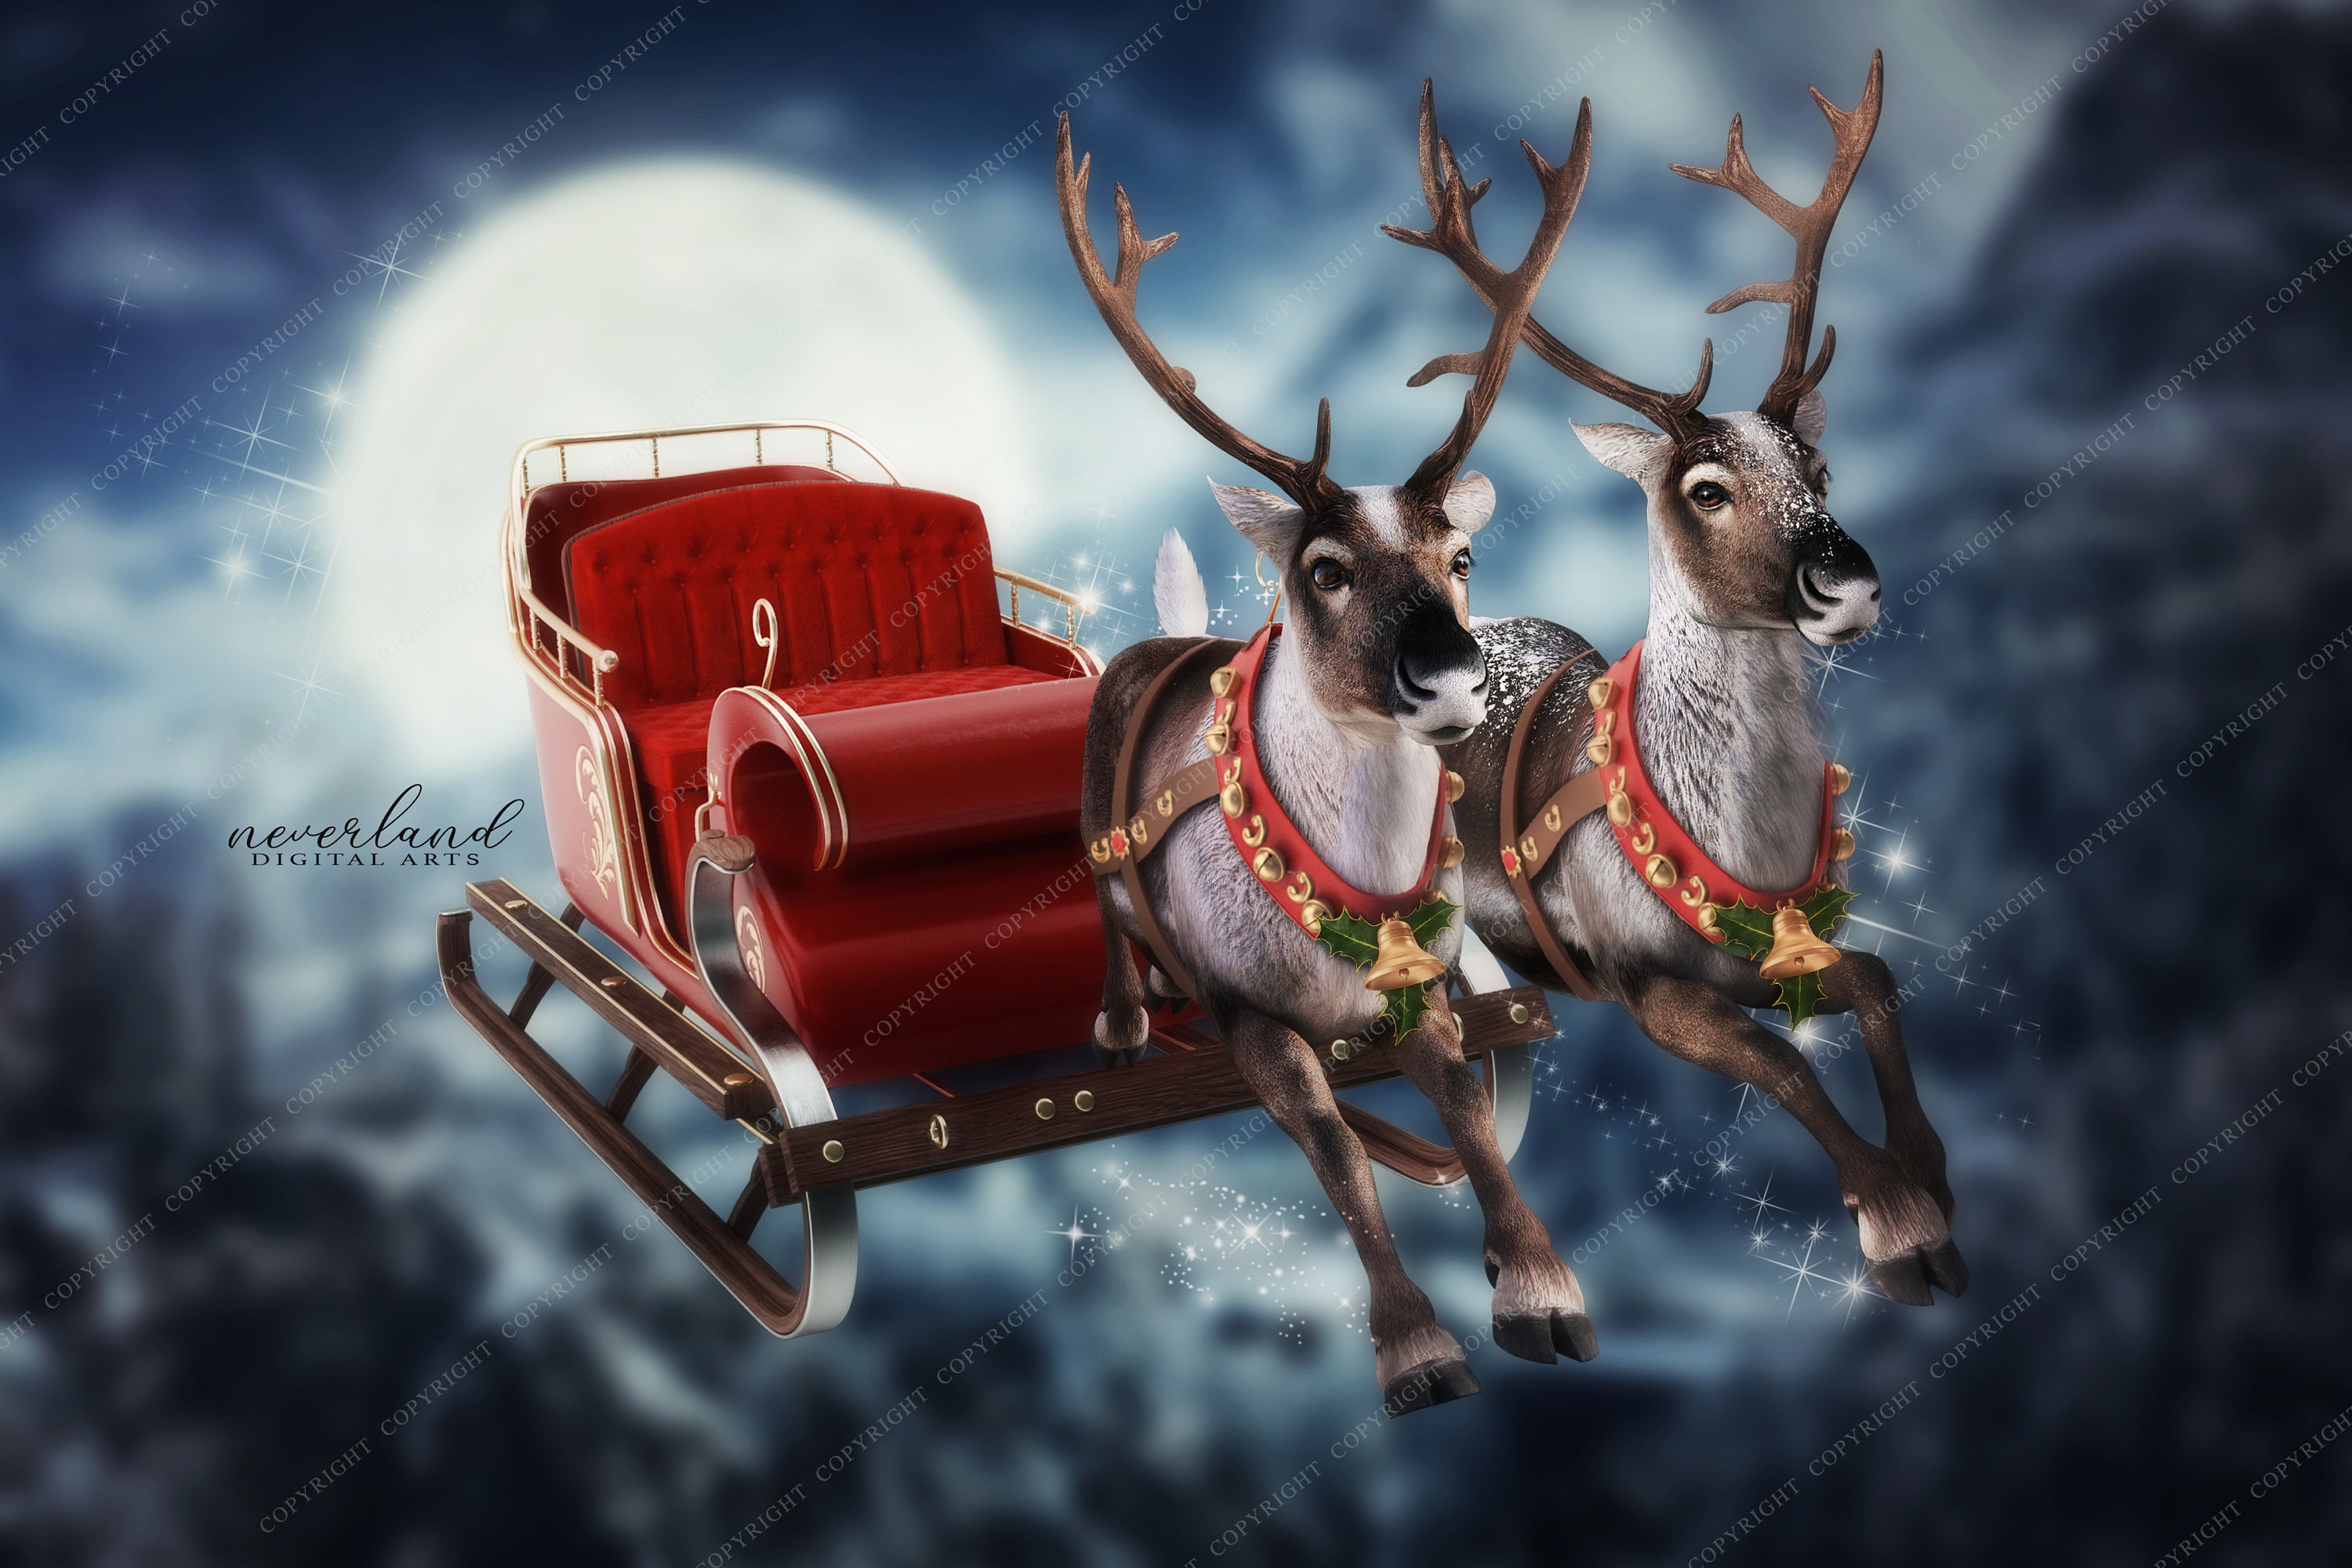 2 PACK Santa's Sleigh and Reindeer Background for - Etsy 日本